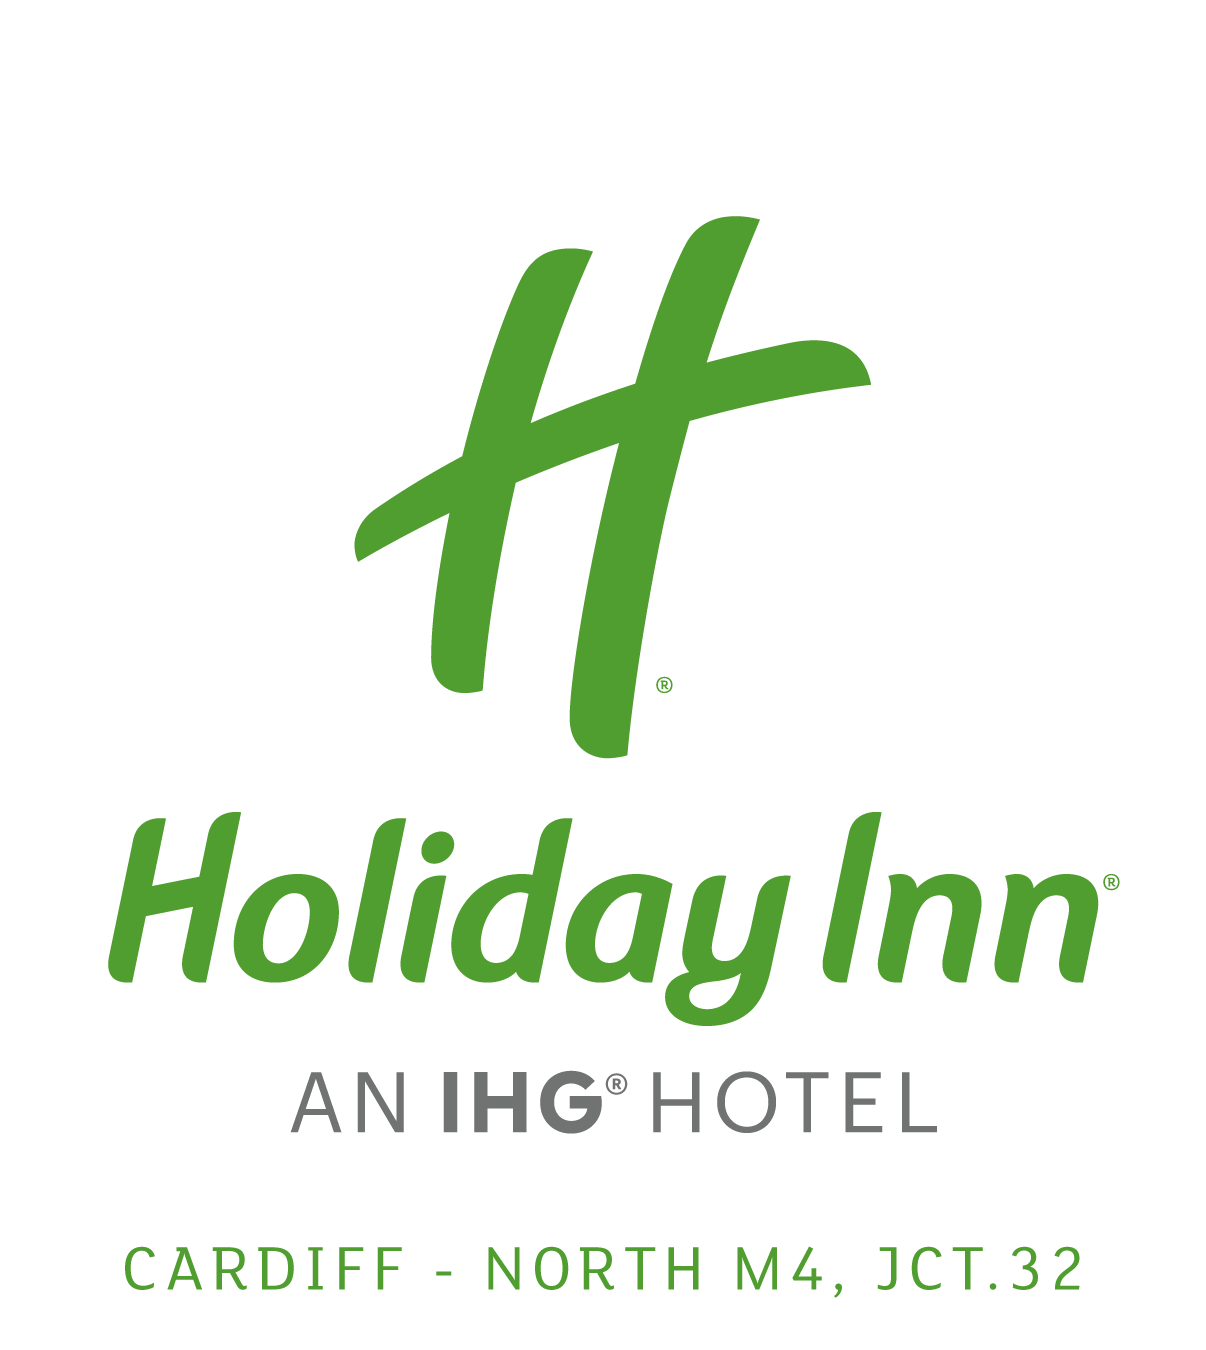 1959Holiday Inn Hotel Cardiff – North M4, Junction 32